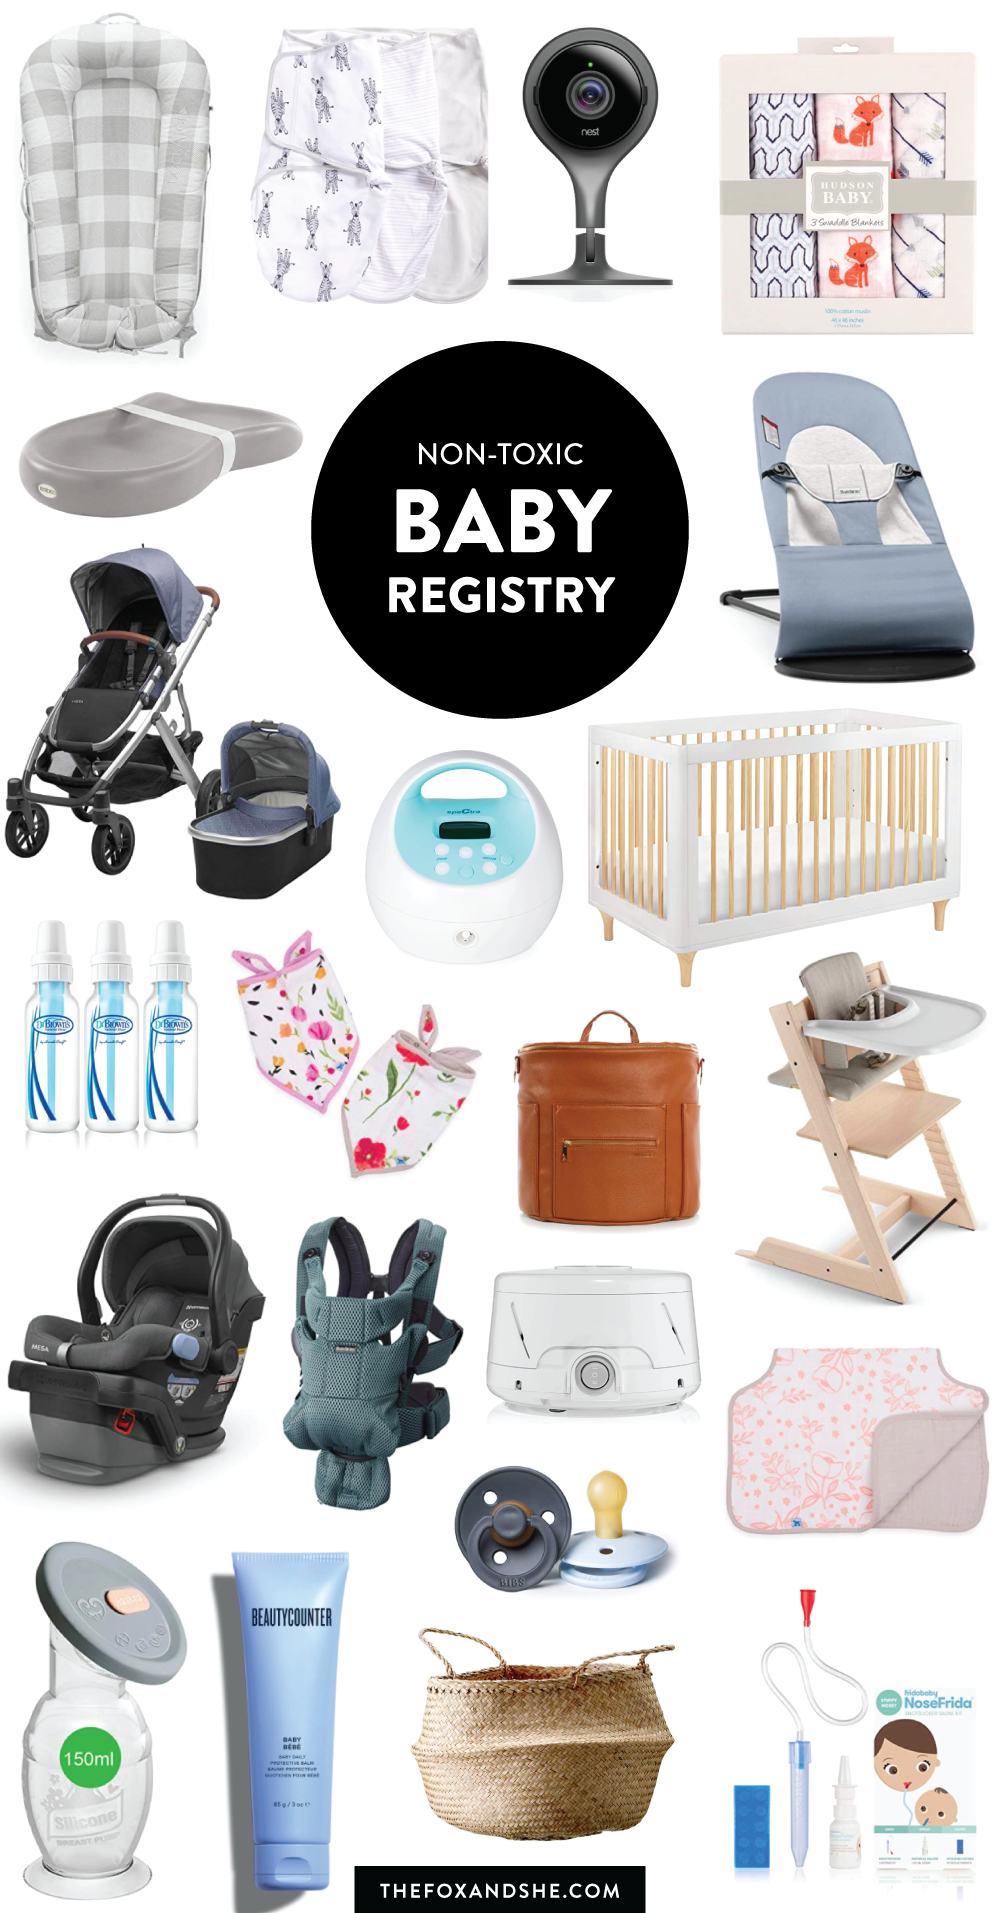 The best non-toxic baby registry products.